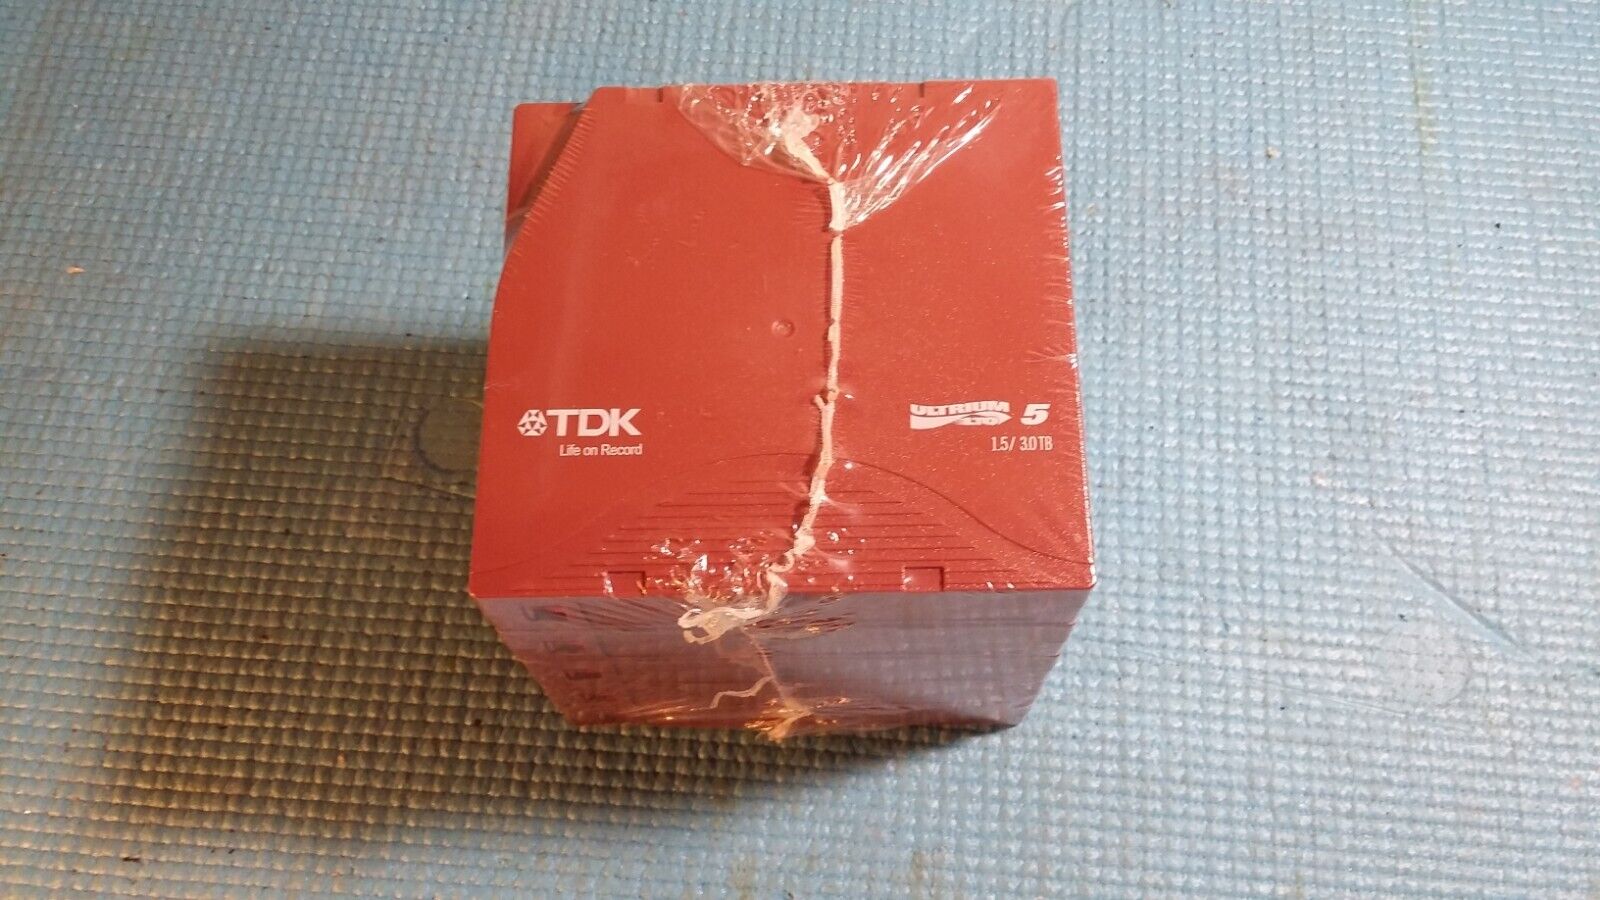 TDK Ultrium LTO-5 Tape - Sealed 5 Tapes per package